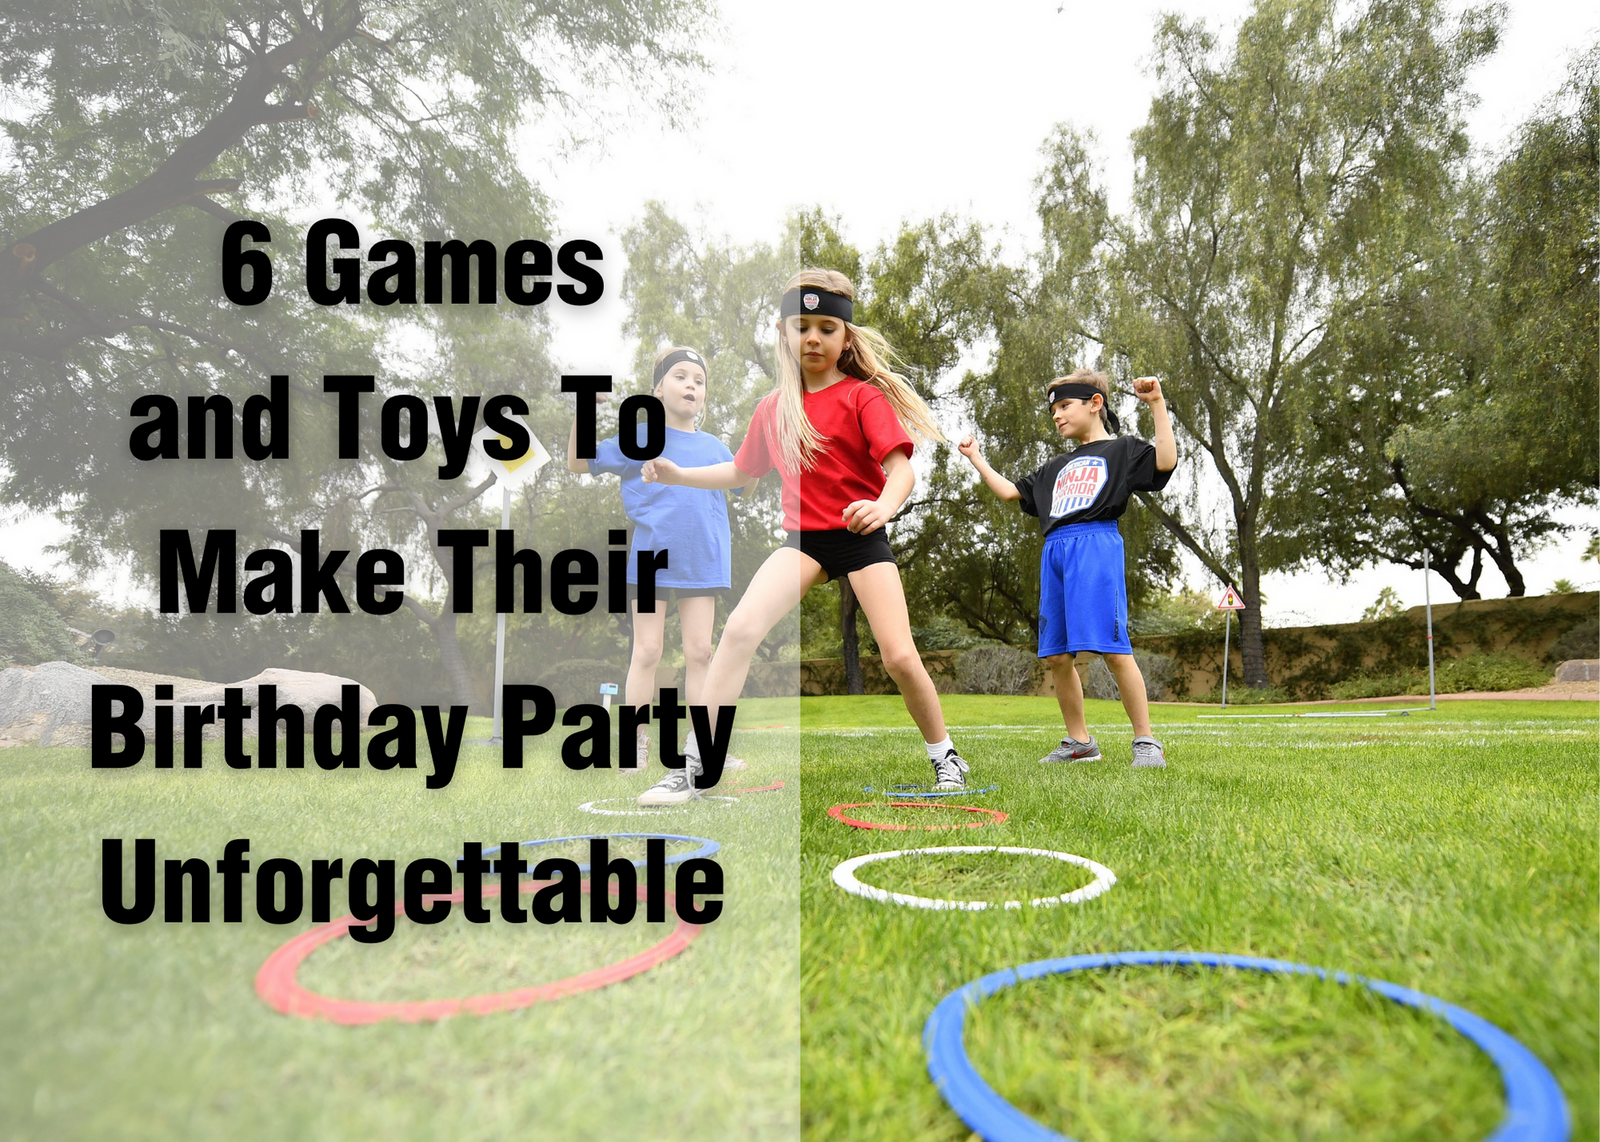 6 Games and Toys To Make Their Birthday Party Unforgettable